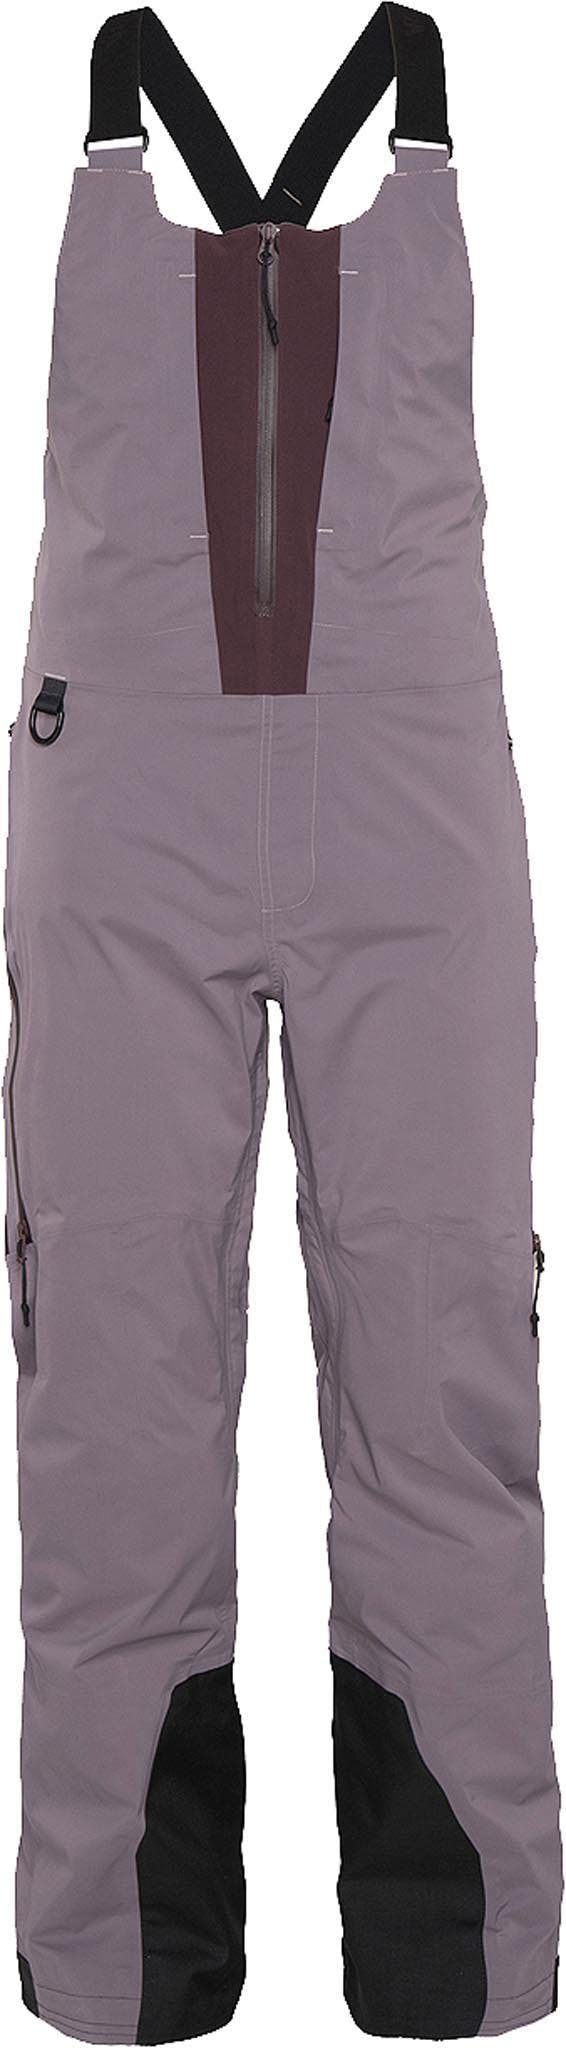 Product image for Rayleigh 3L Bib Pant - Women's